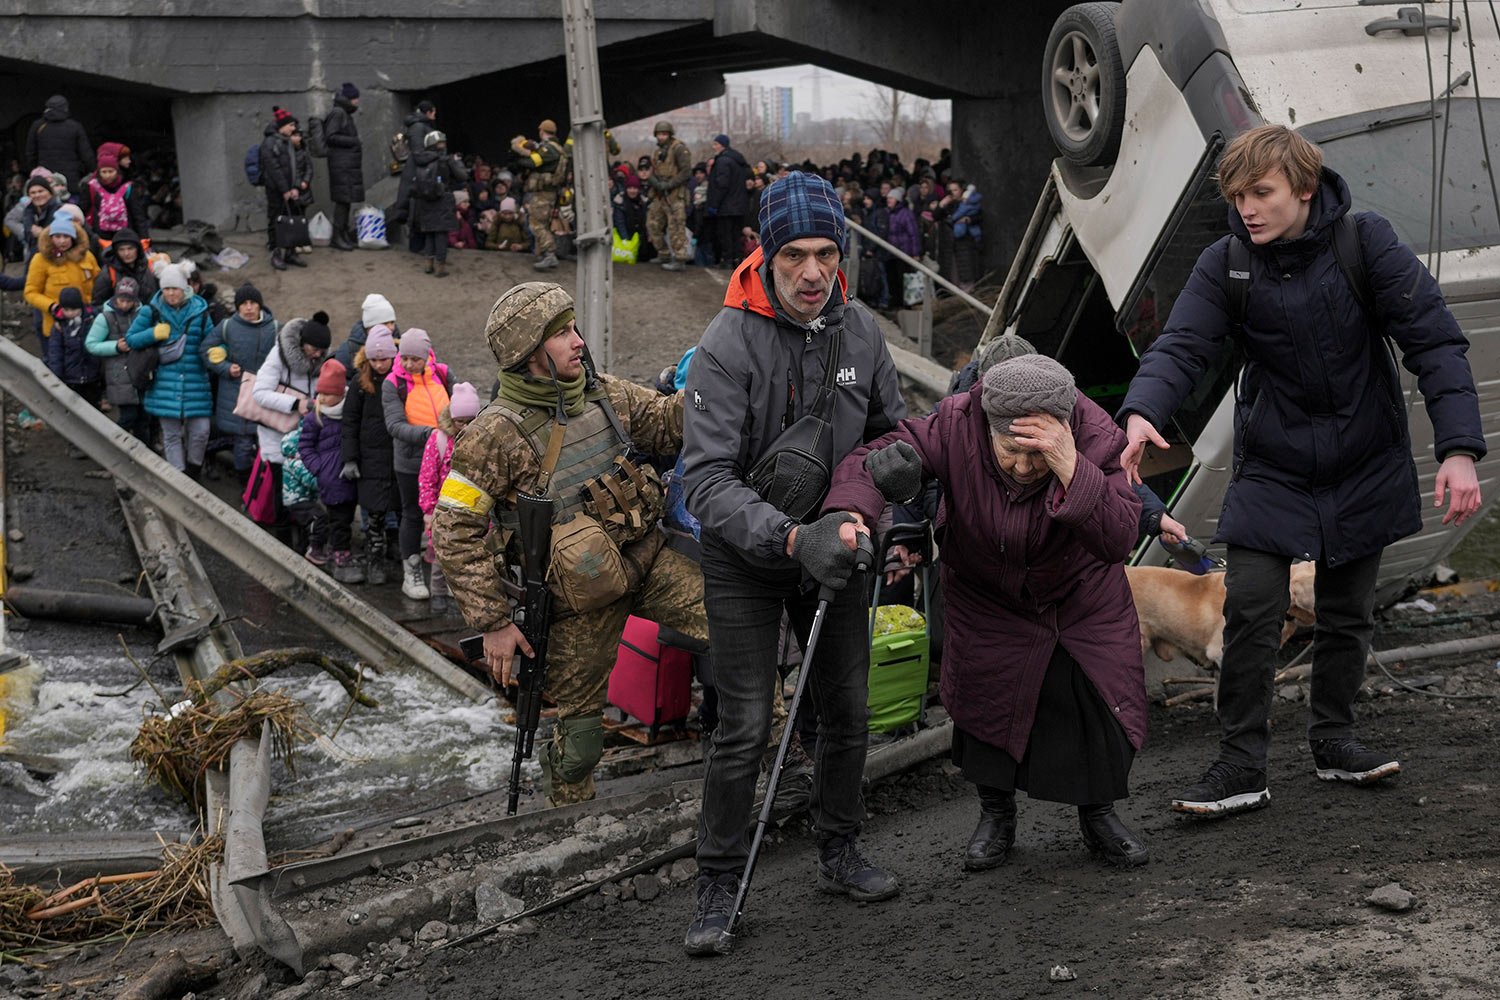  An elderly lady gets assisted while crossing the Irpin river, under a bridge that was destroyed, as civilians flee the town of Irpin, Ukraine, Saturday, March 5, 2022. (AP Photo/Vadim Ghirda) 